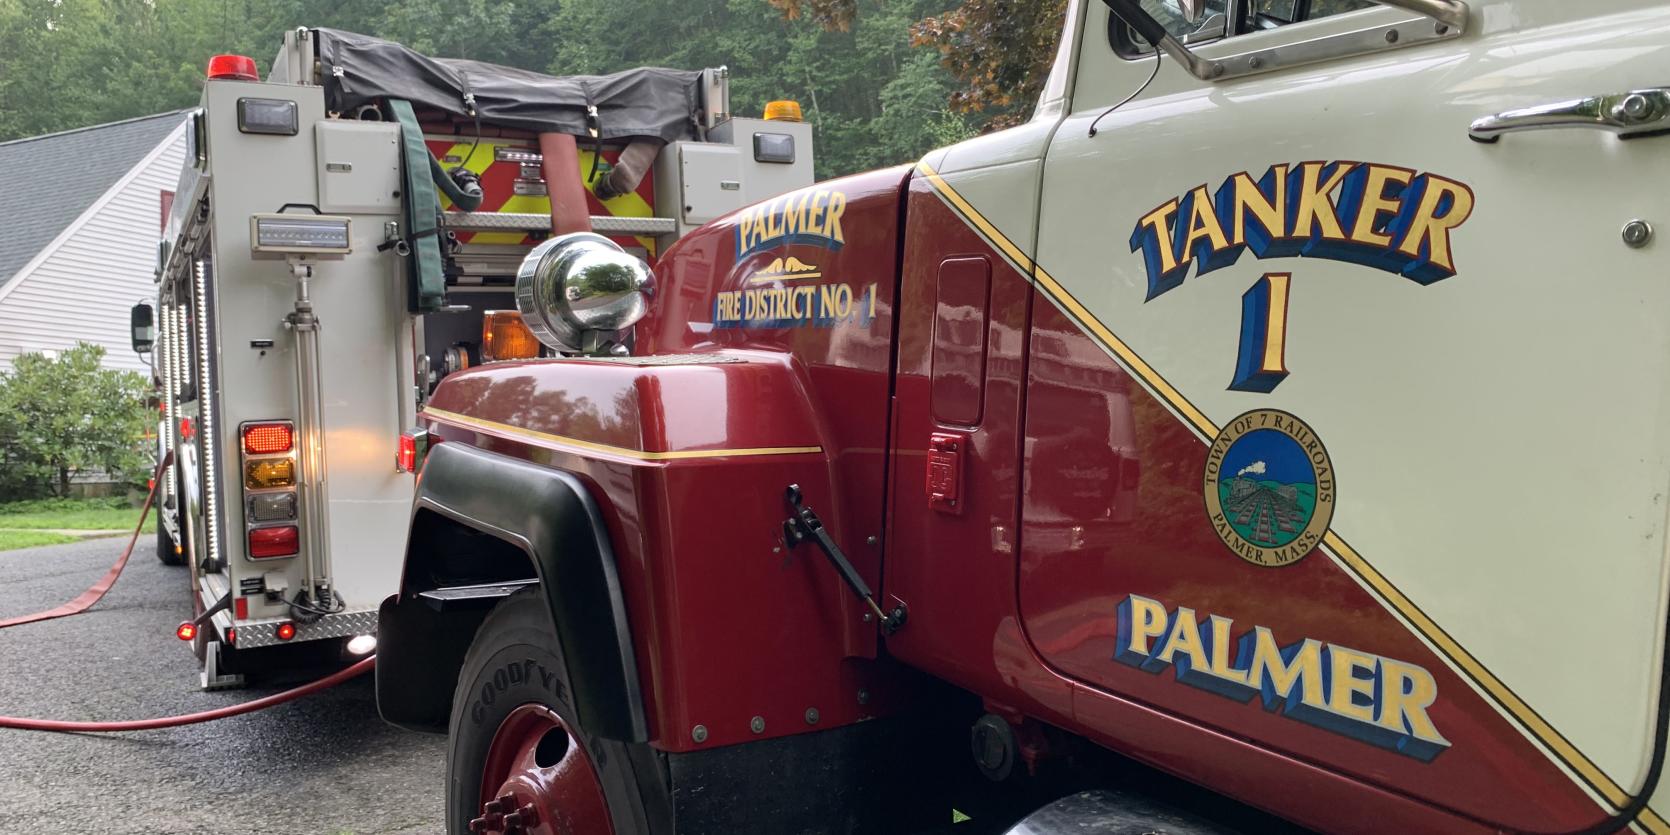 A photo of a fire engine with the words "Tanker 1 Palmer"